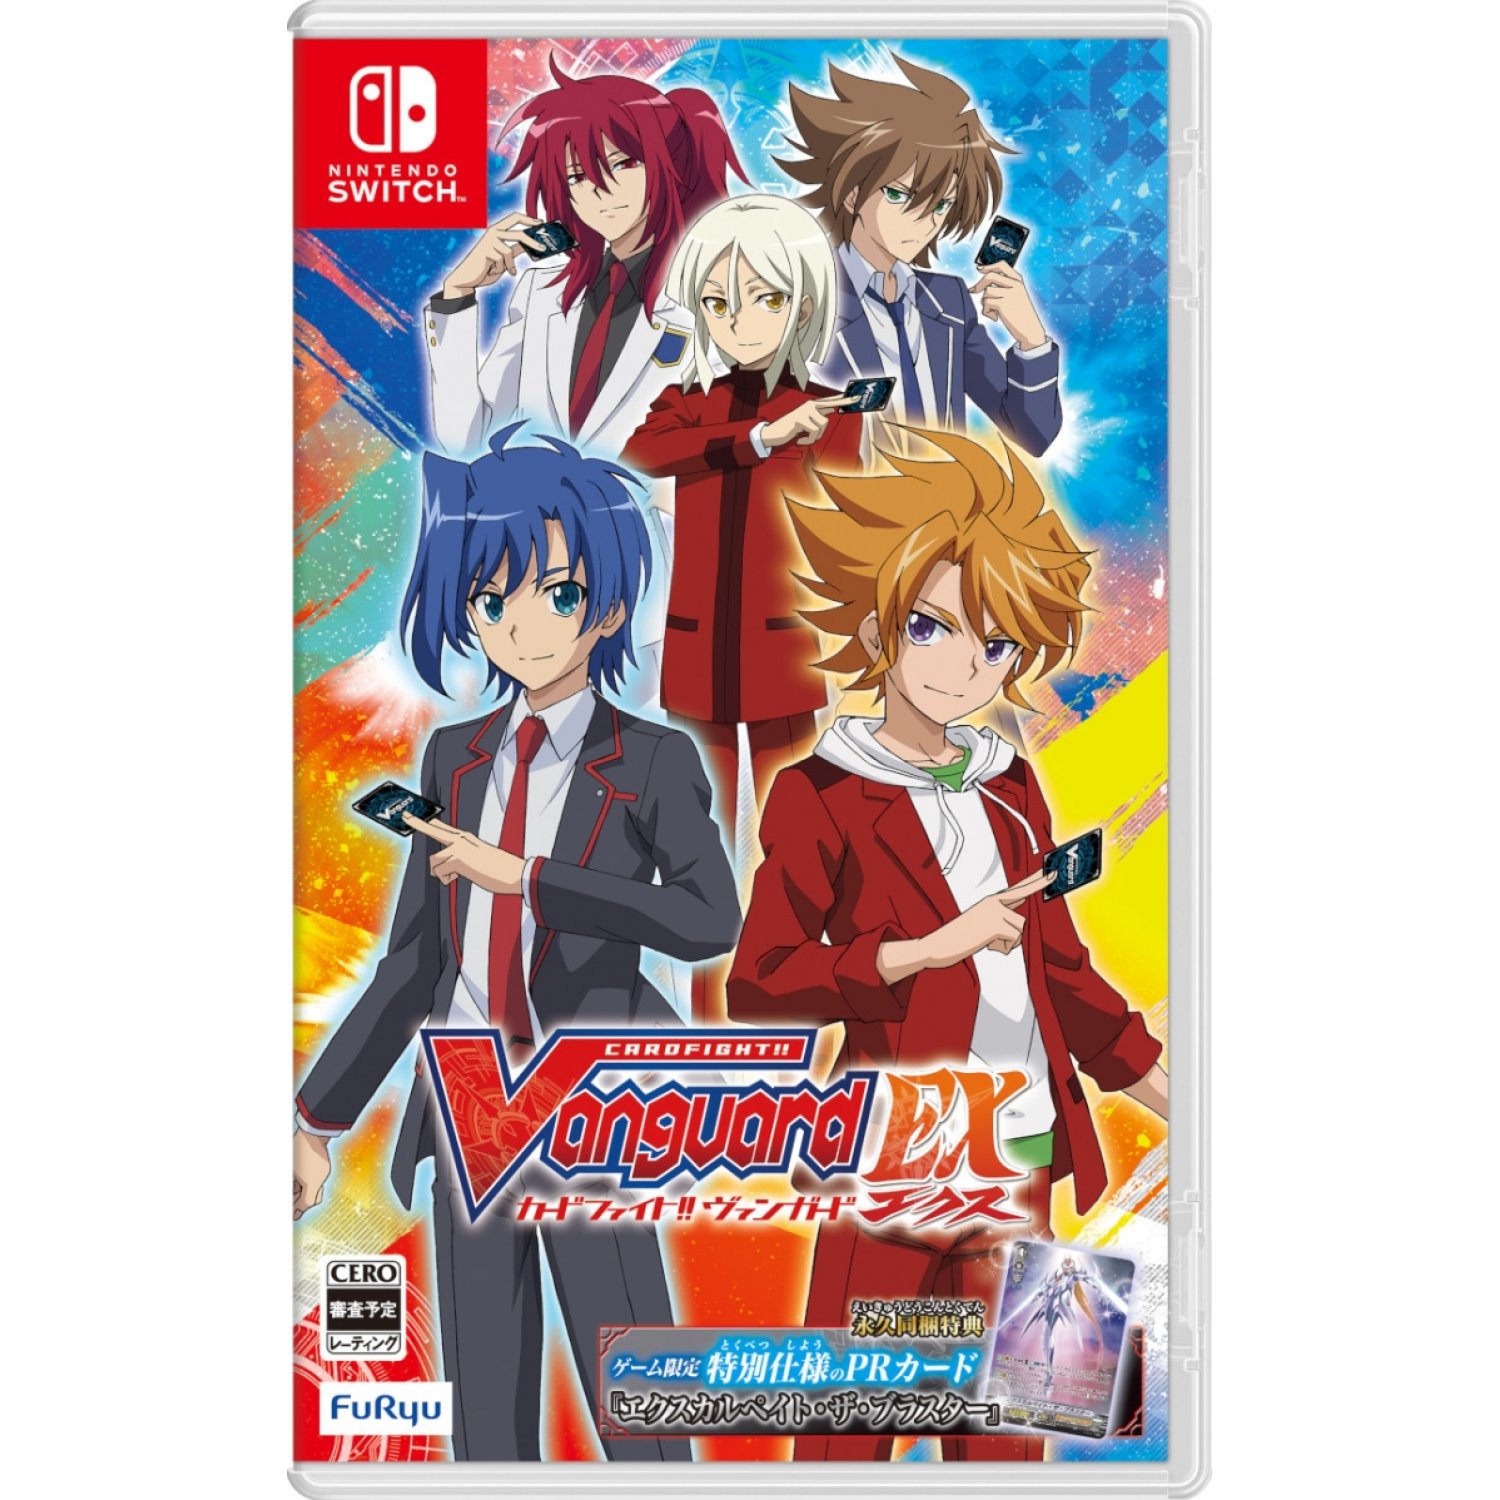 cardfight vanguard browser game